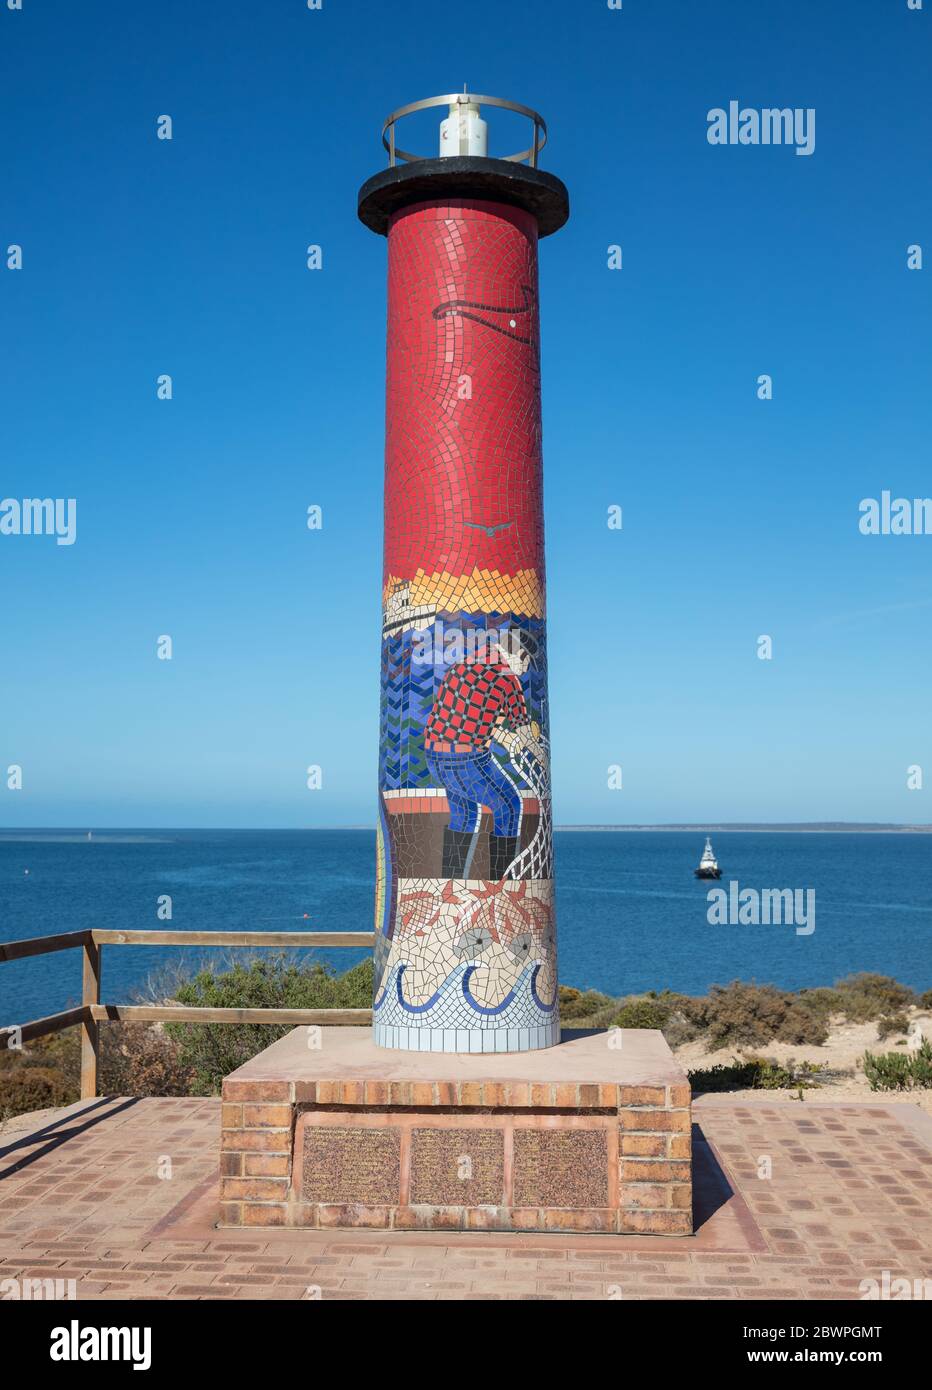 Thevenard South Australia November 17th 2019 : Commemorative light sculpture for locals who have lost their lives working at sea Stock Photo